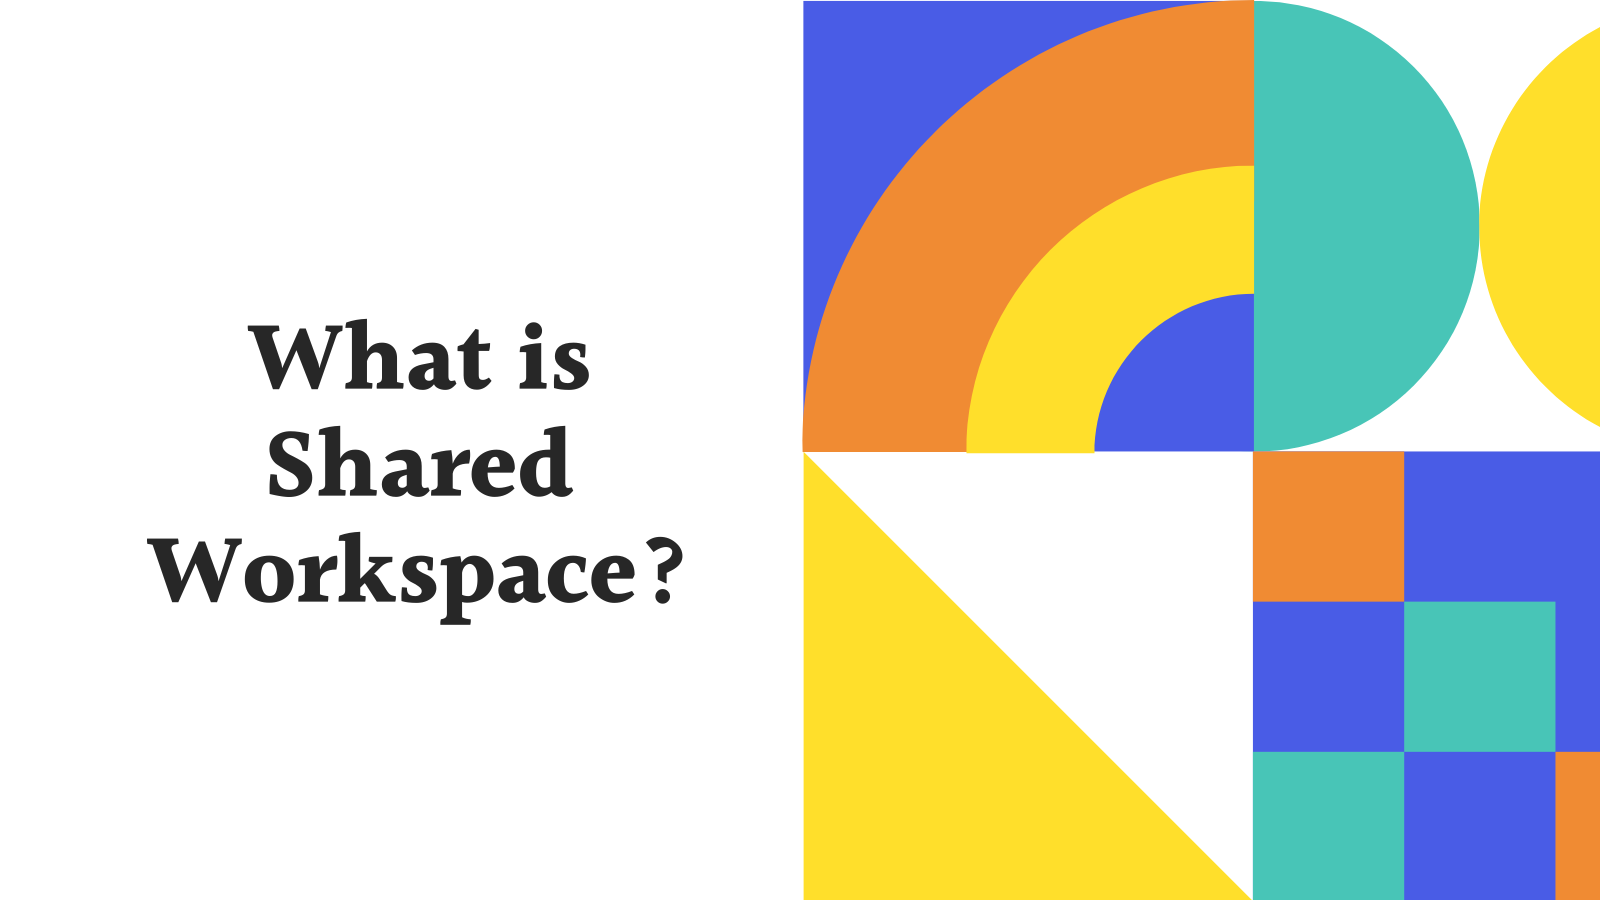 What is Shared Workspace